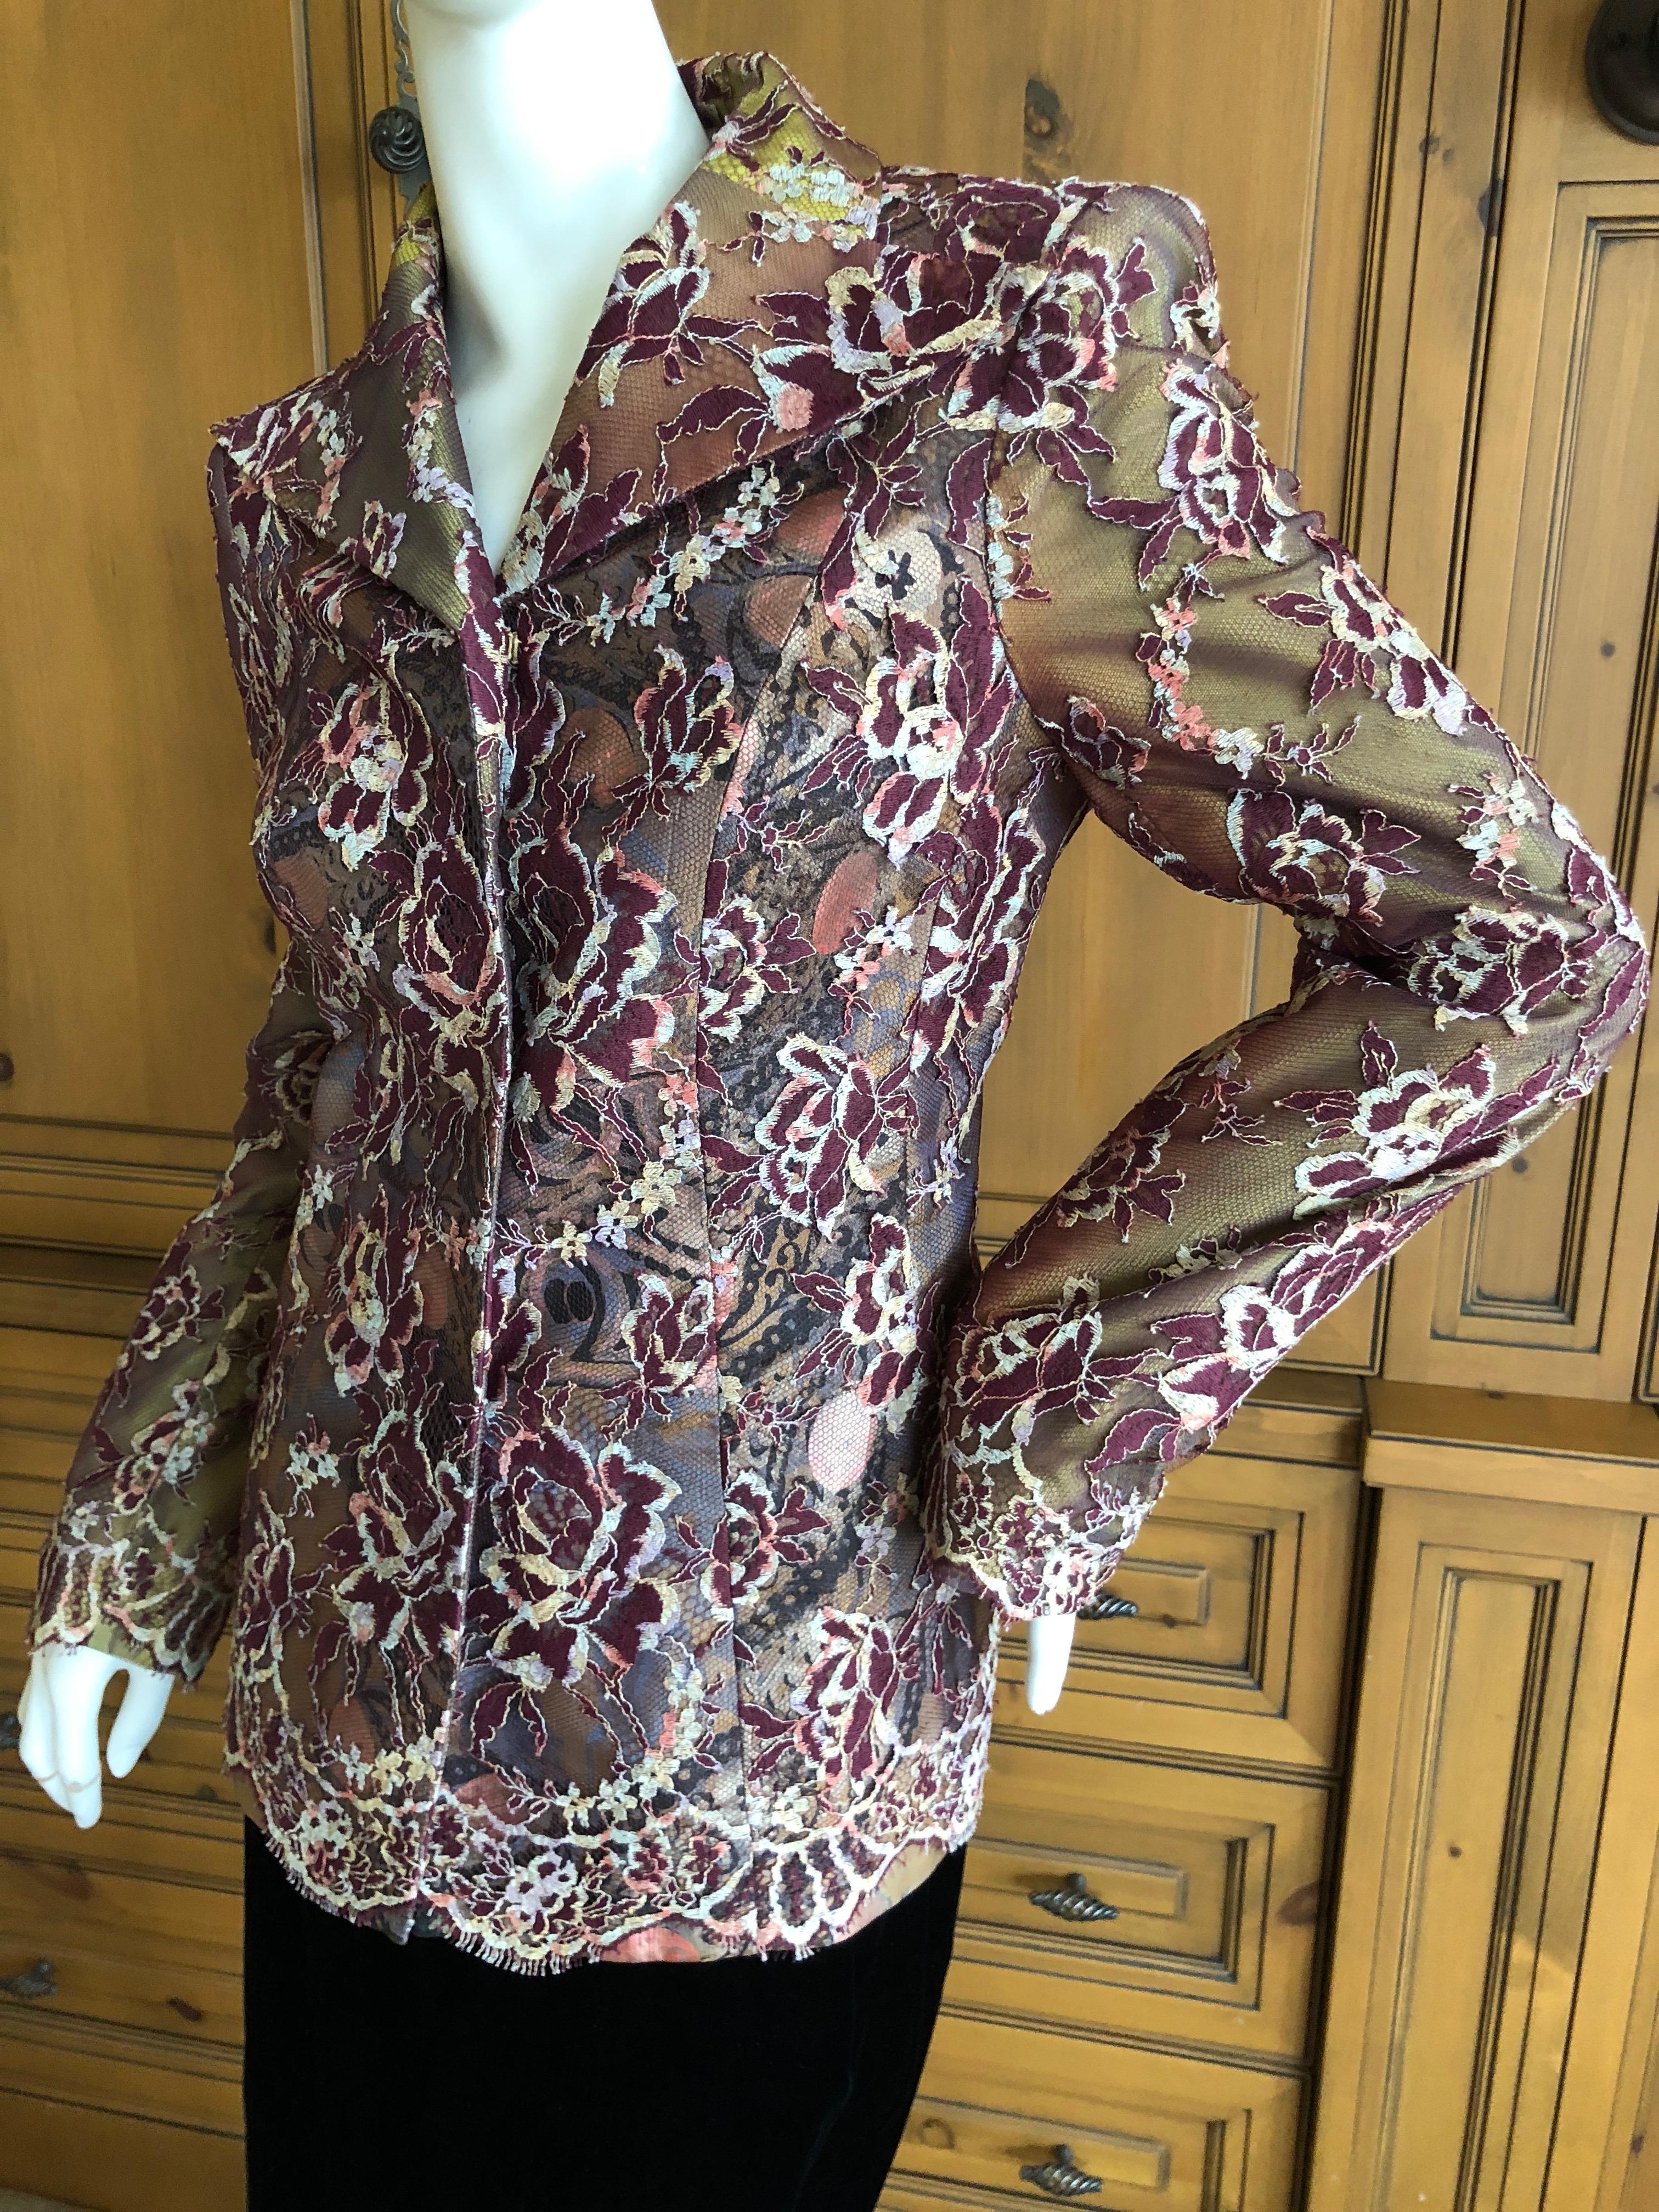  Christian Lacroix Romantic silk jacket wth lace overlay.
Much prettier in person,
Size 38
 Bust 36